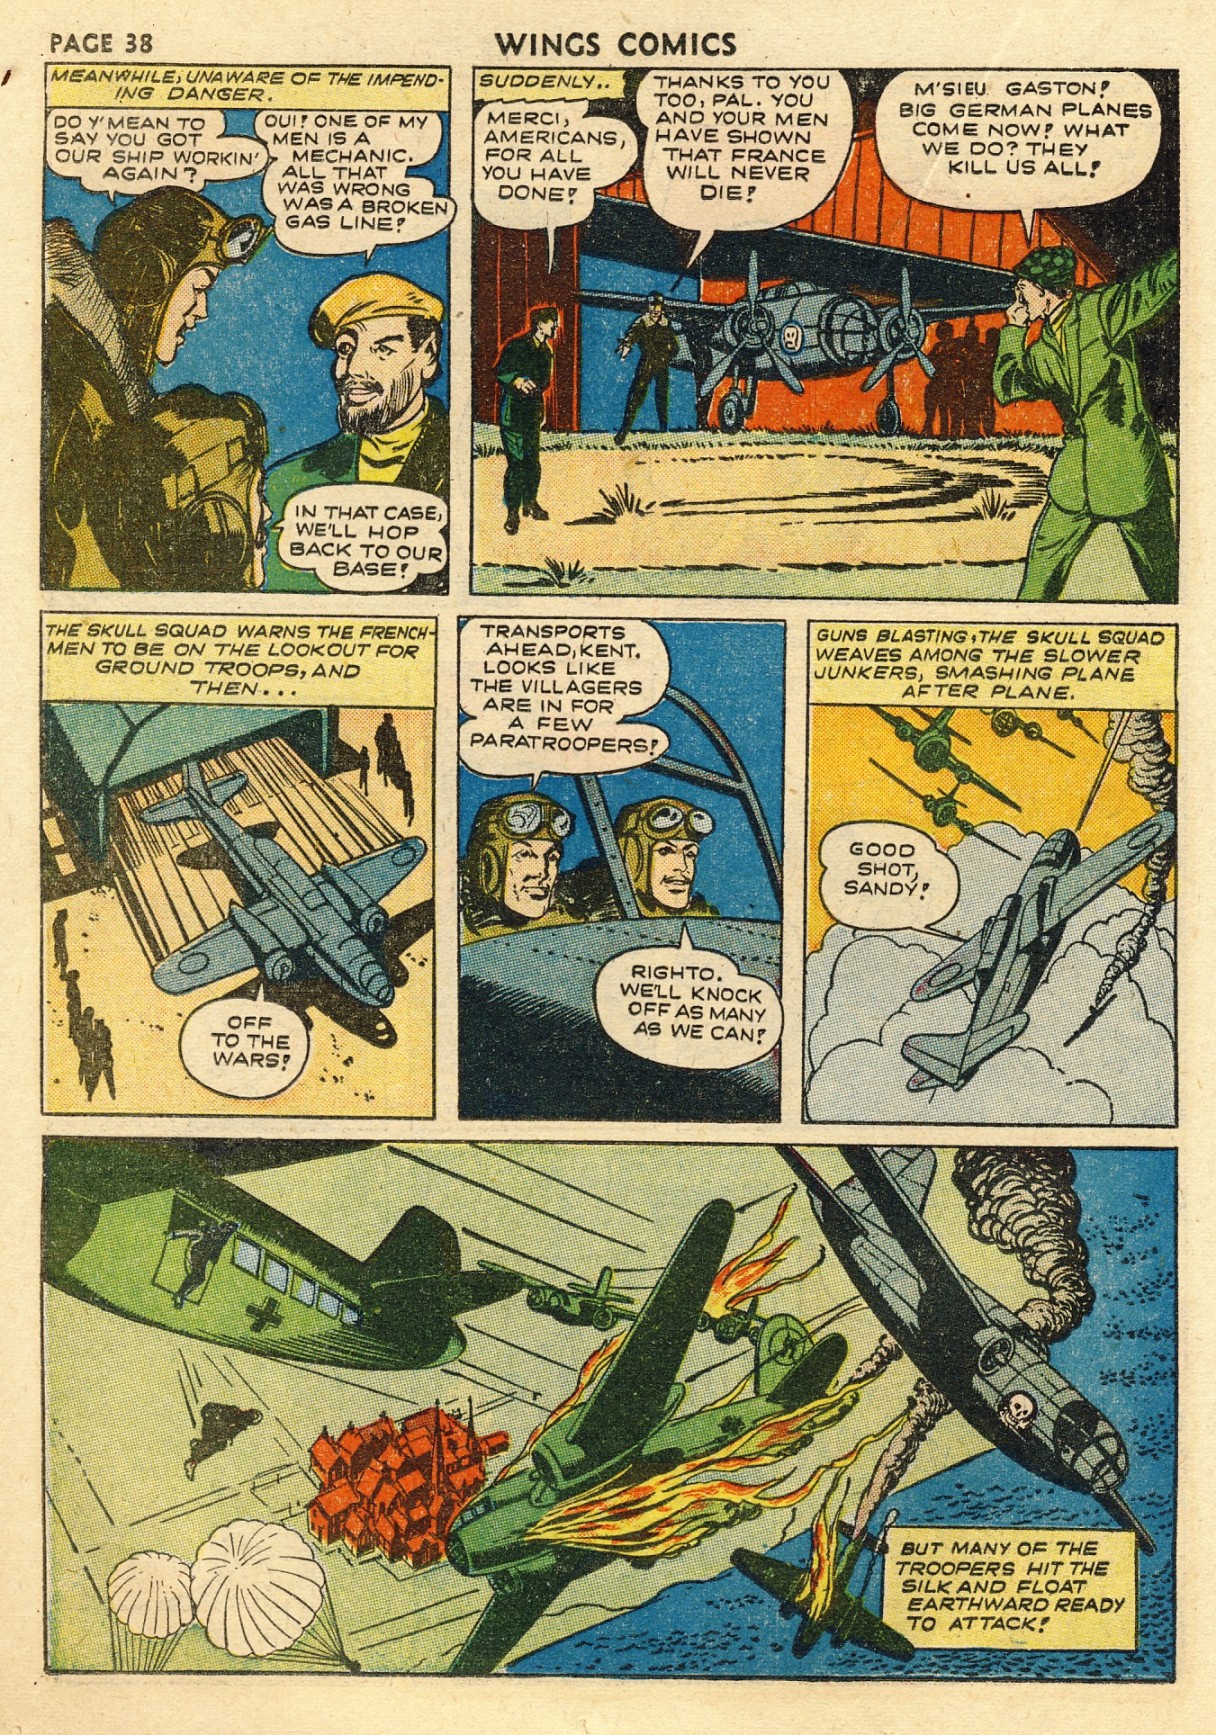 Read online Wings Comics comic -  Issue #33 - 40